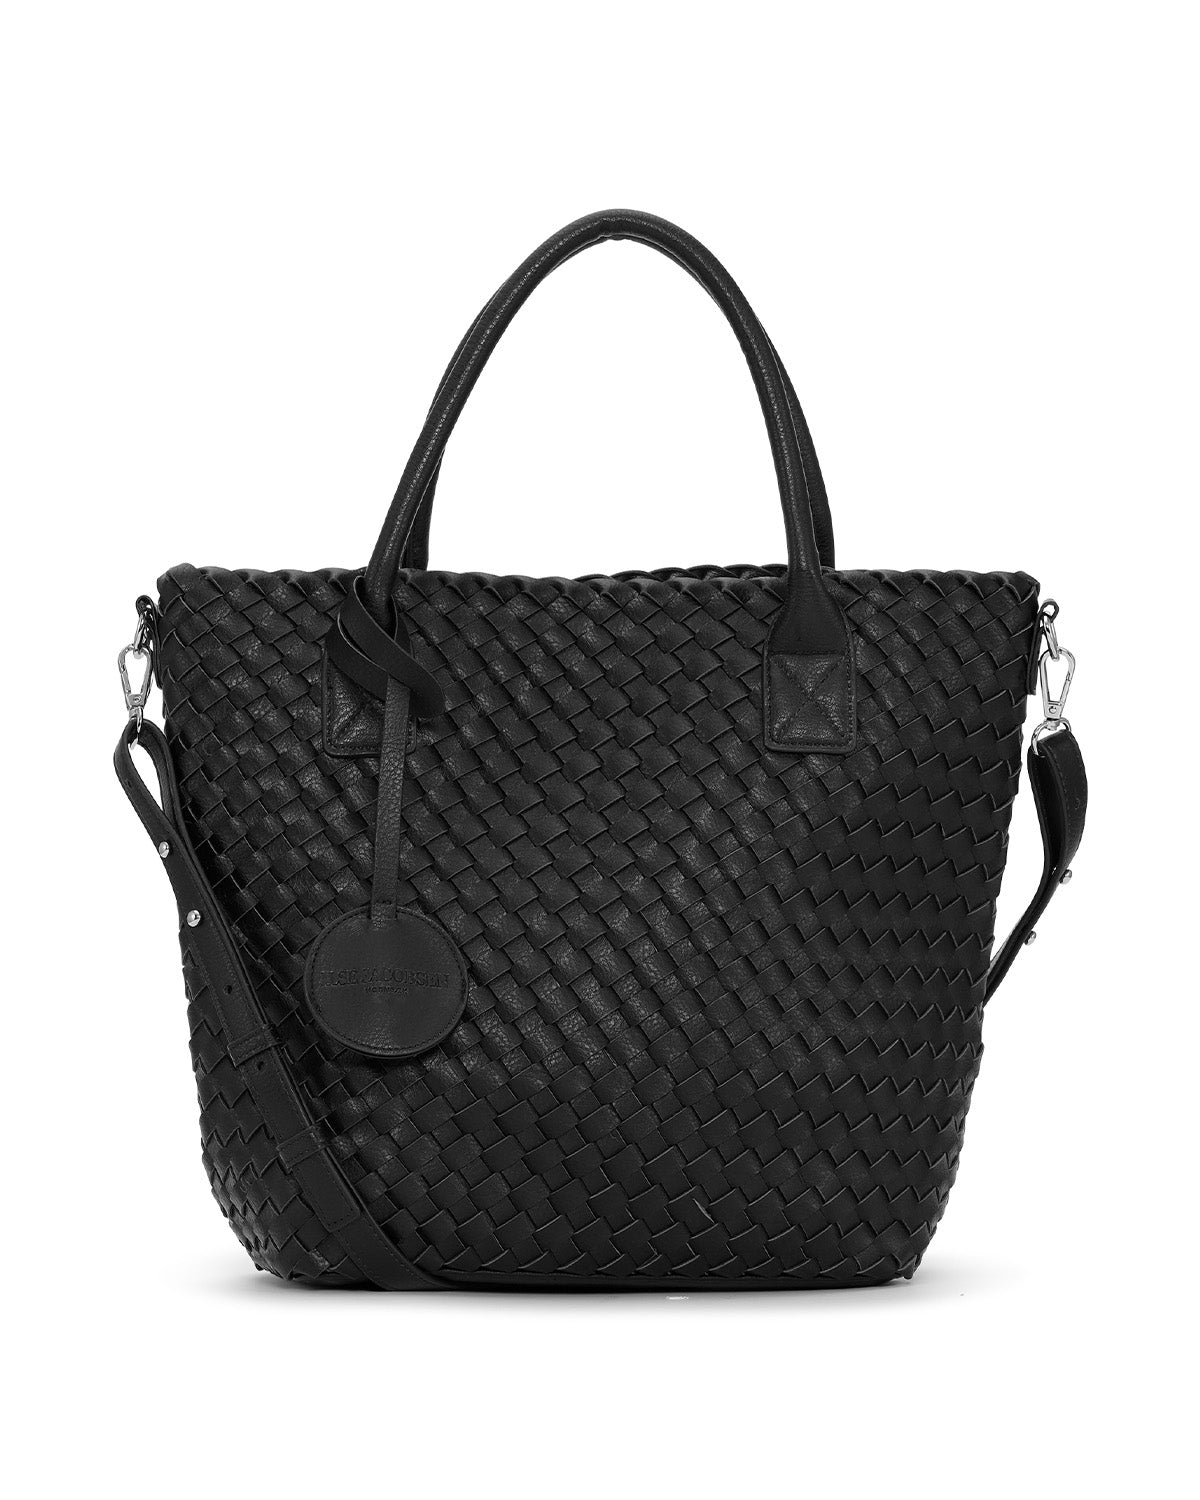 Tote bag in color black by Ilse Jacobsen